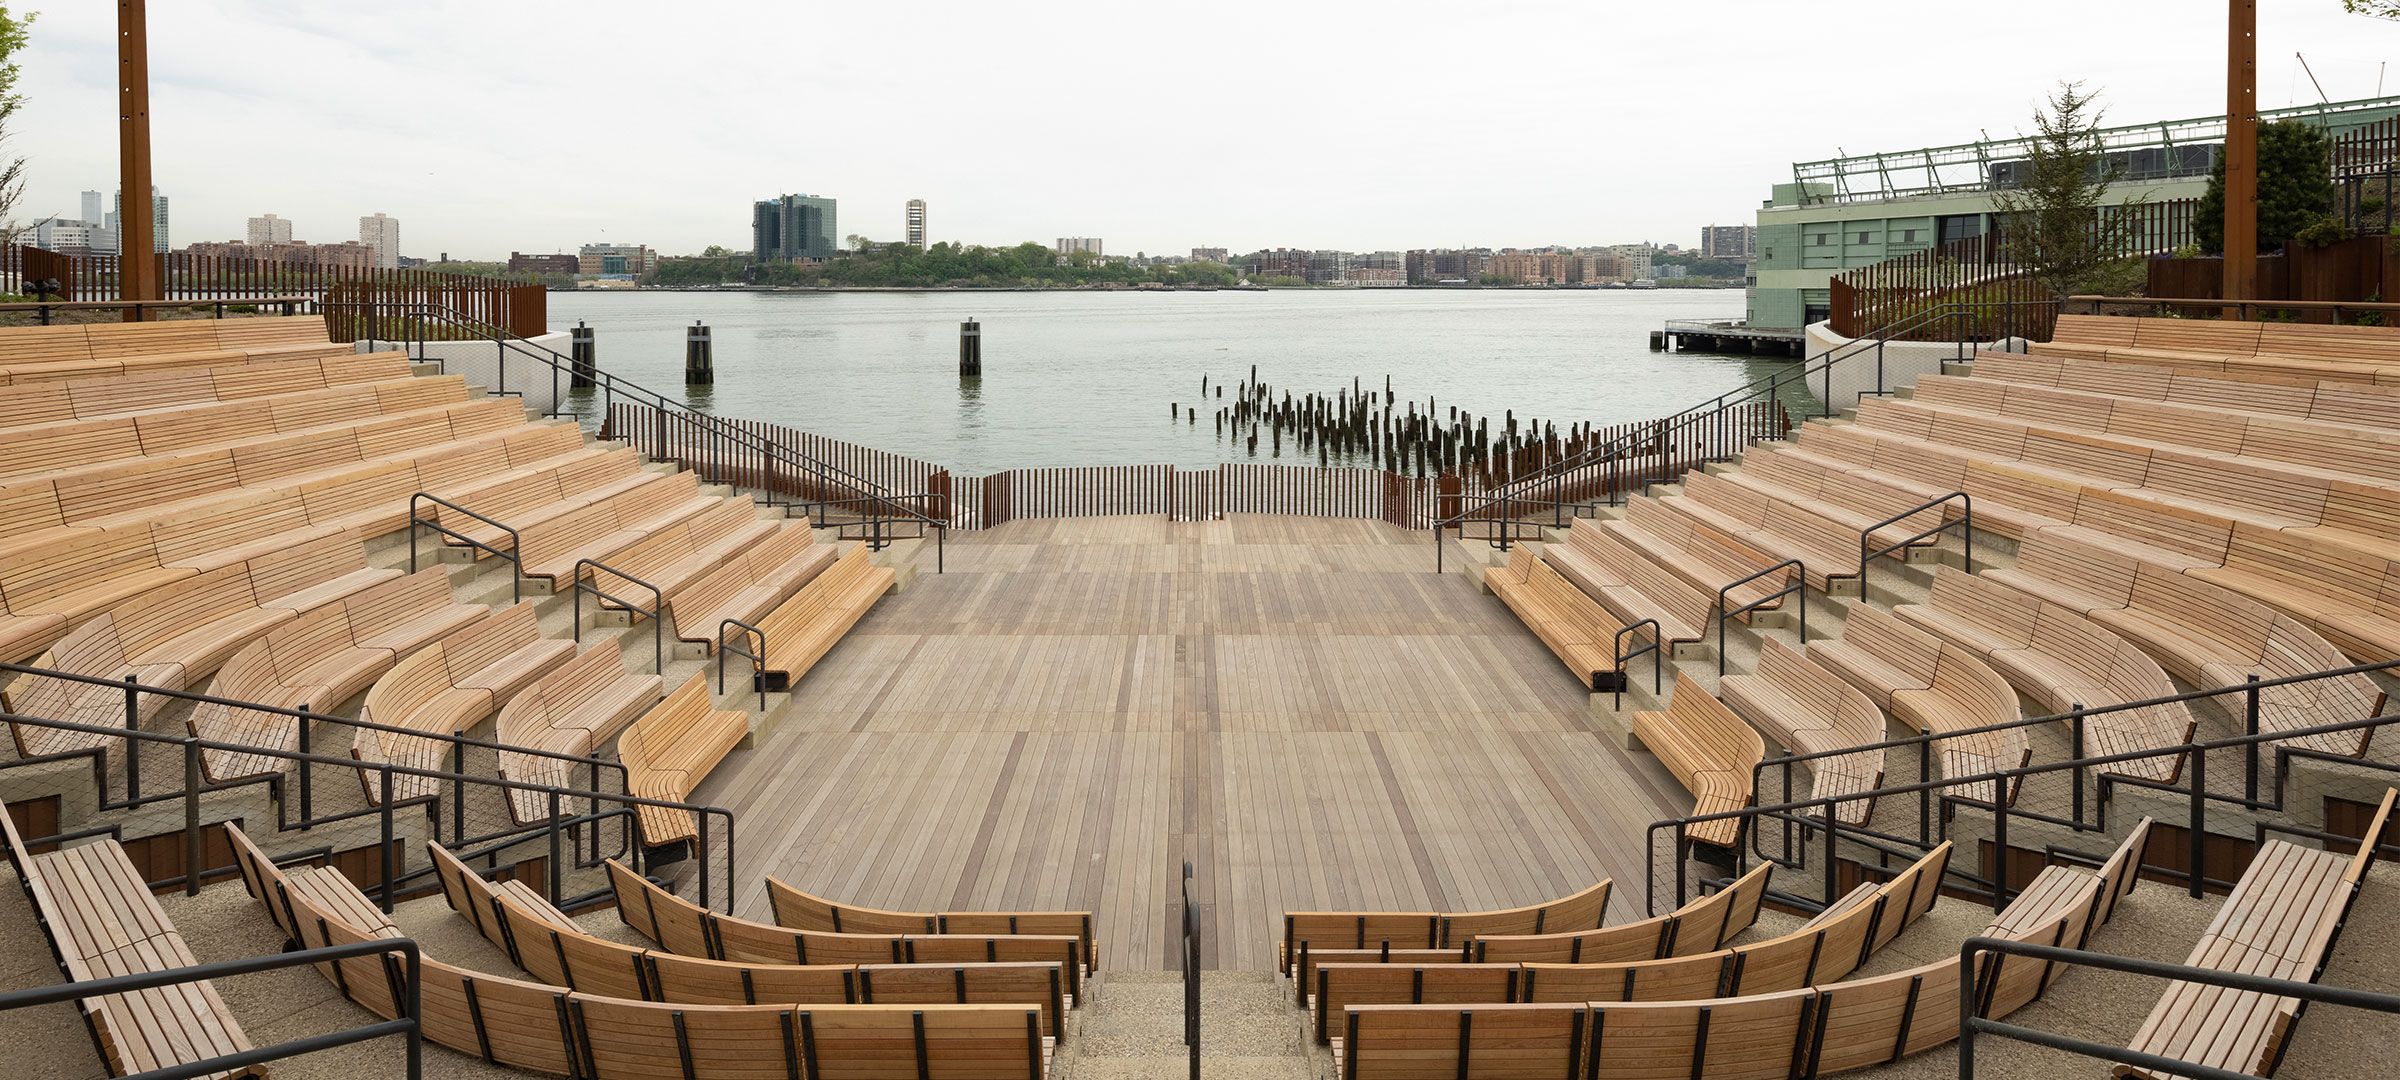 View of The Amph and its seating facing the Hudson River